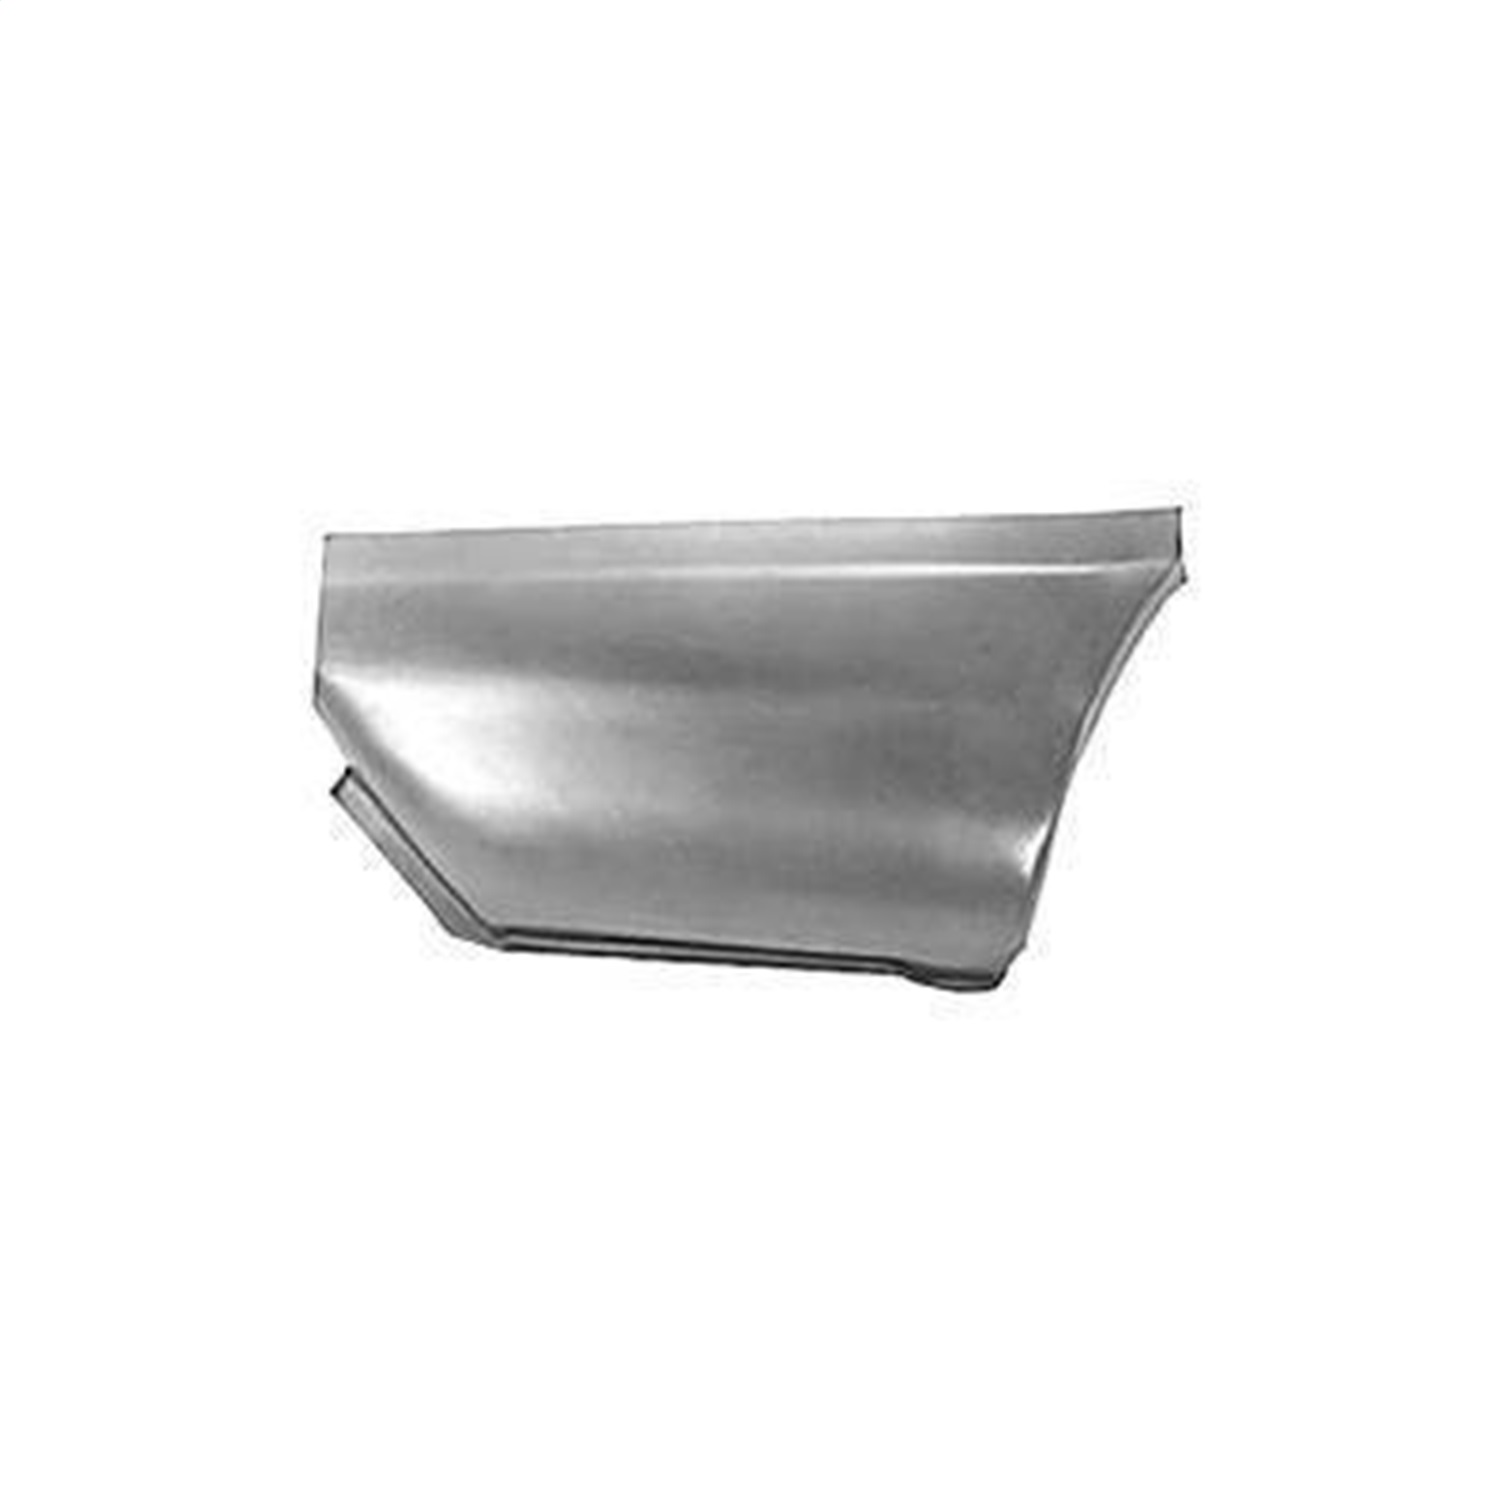 Lower Rear Quarter Panel Section 1967-1968 Ford Mustang